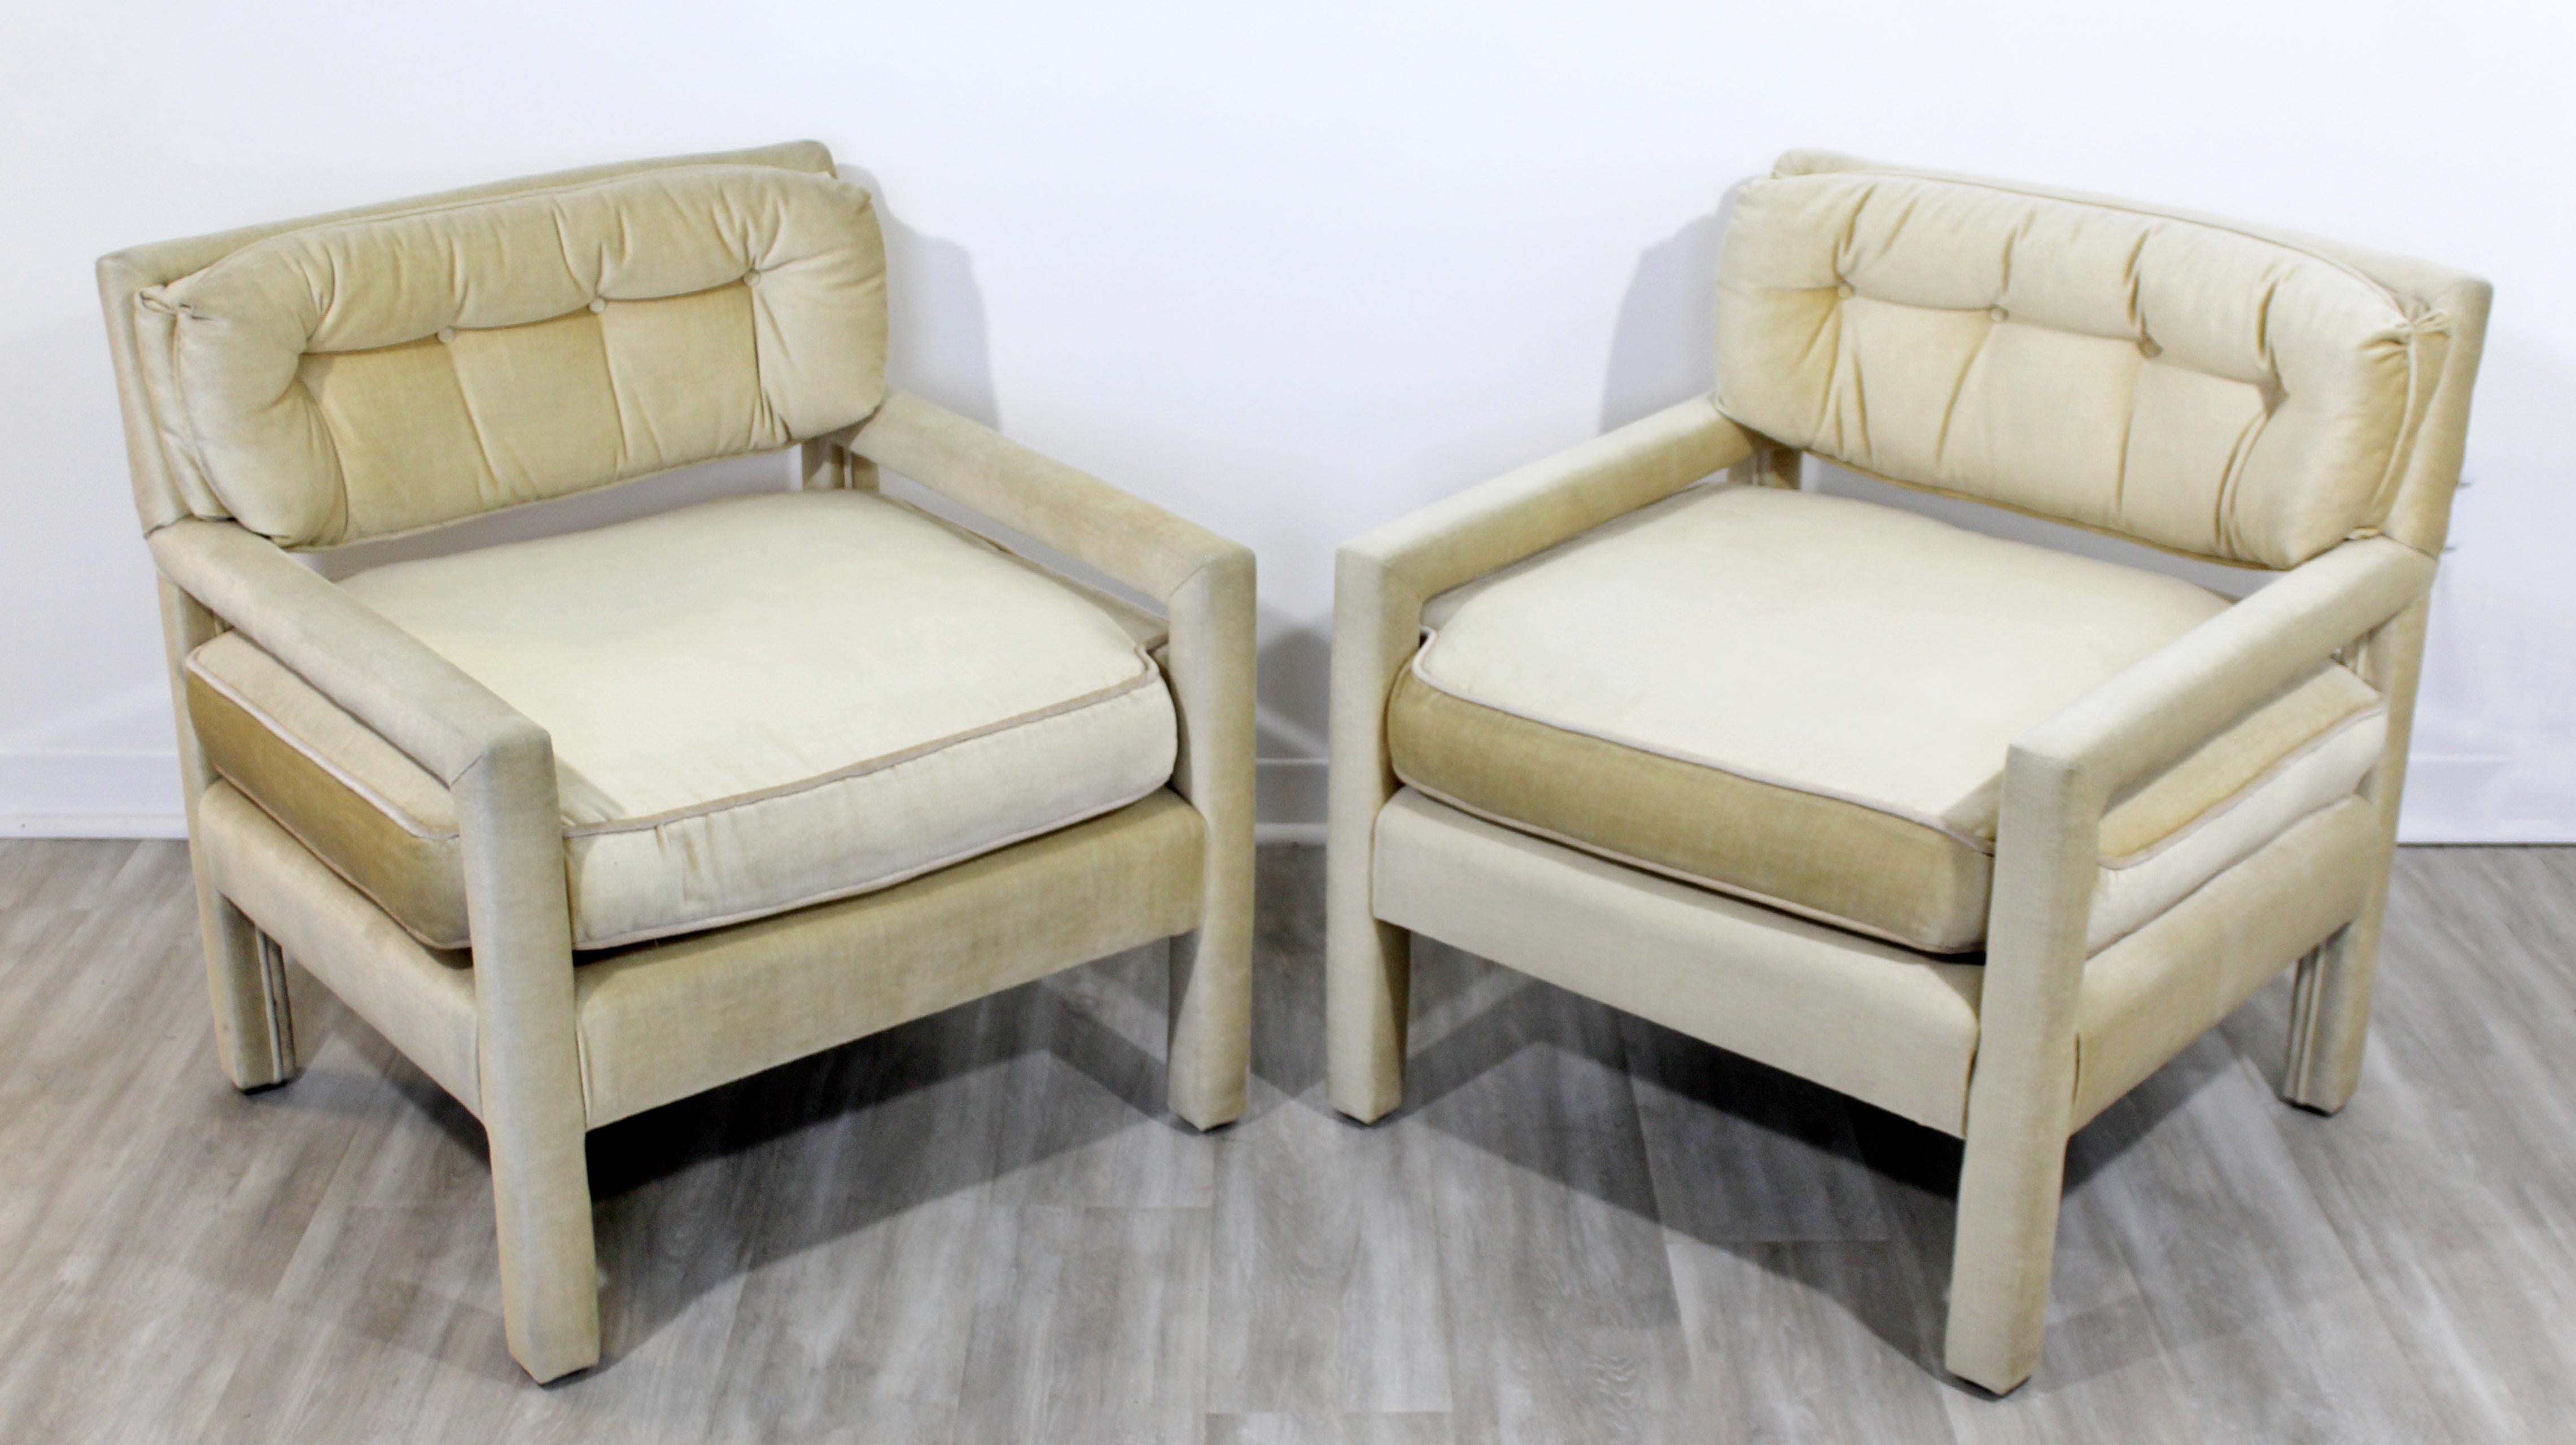 For your consideration is a pair of large, plush armchairs, in a velvet fabric, attributed to Milo Baughman for Parsons, circa 1970s. In excellent condition. Due to the lighting they look discolored but they are in excellent condition and are cream